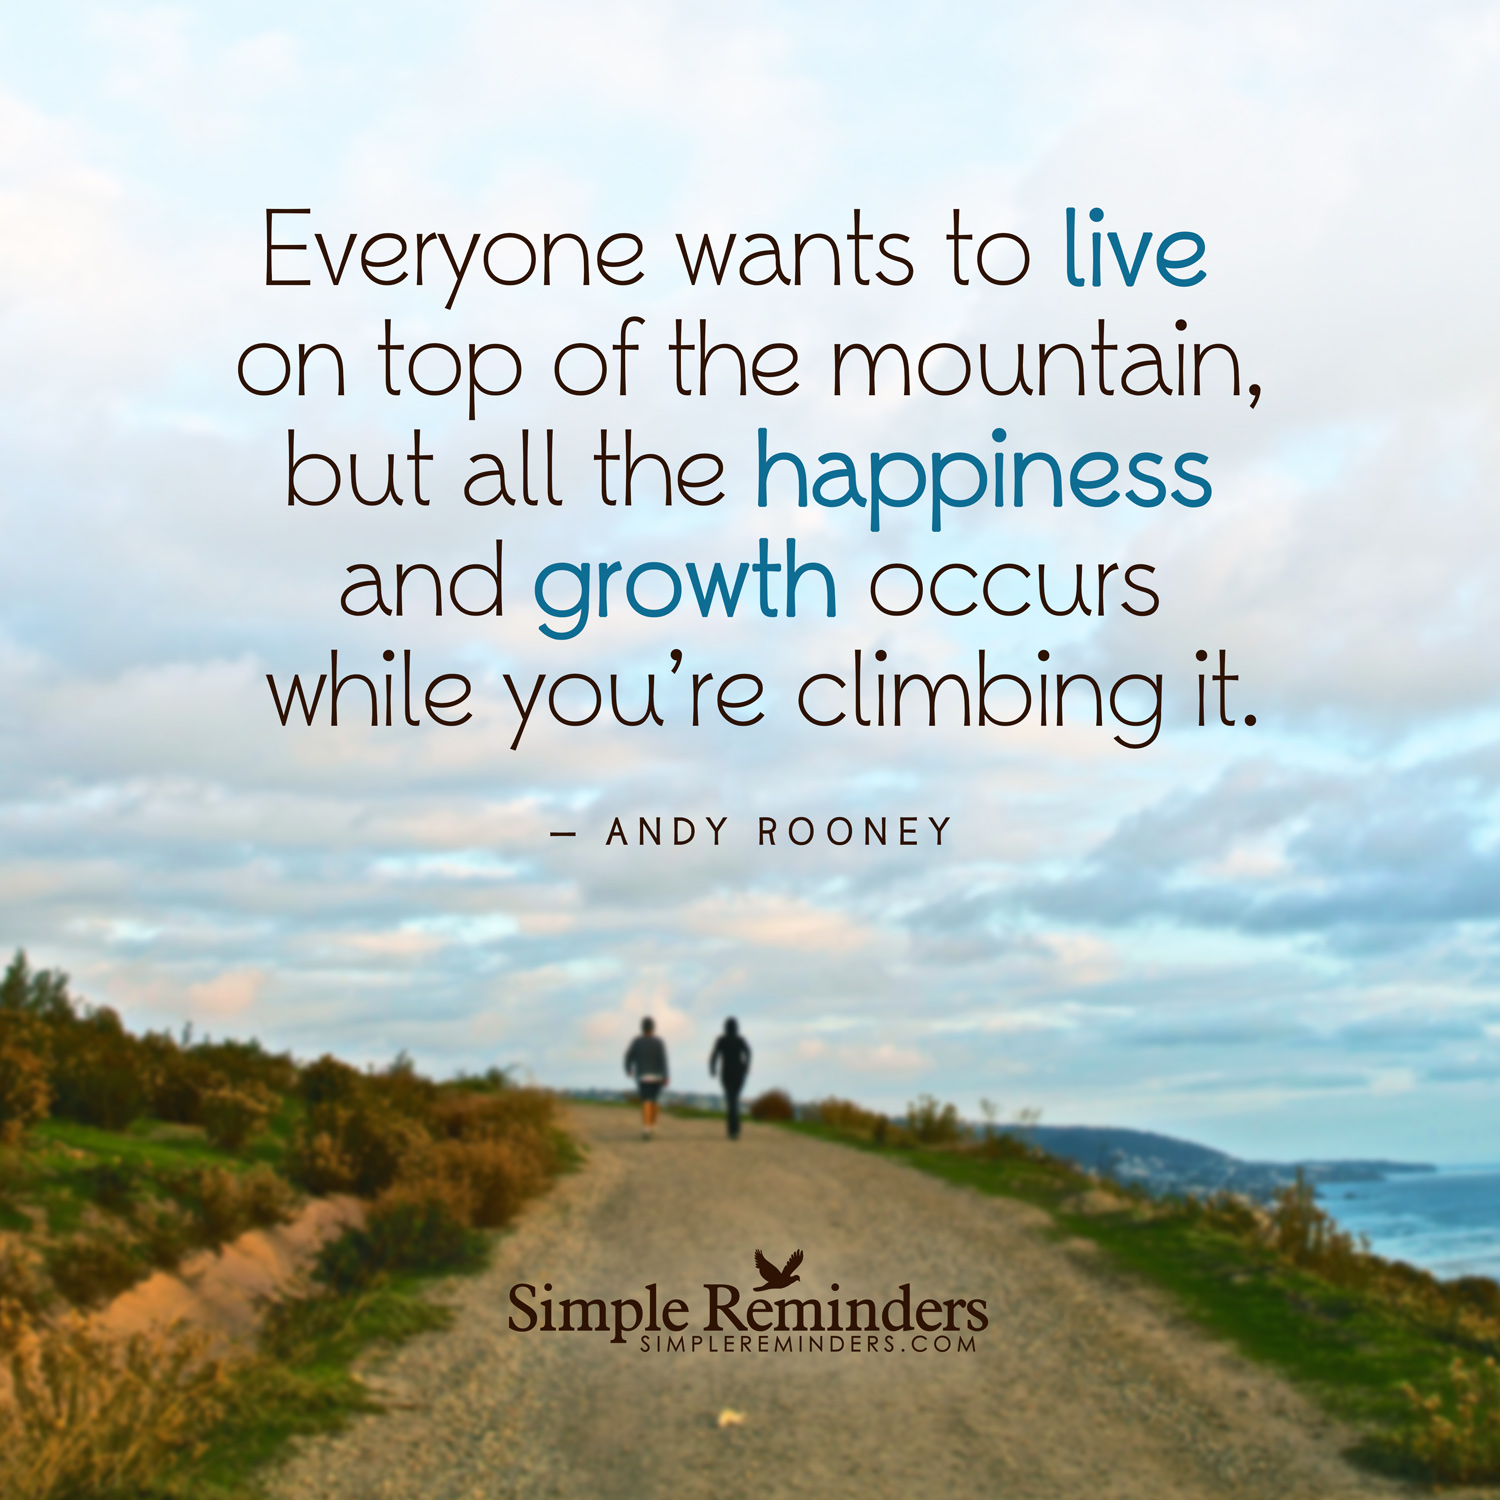 Everyone wants to live on top of the mountain, but all the happiness and growth occurs while you're climbing it (1)